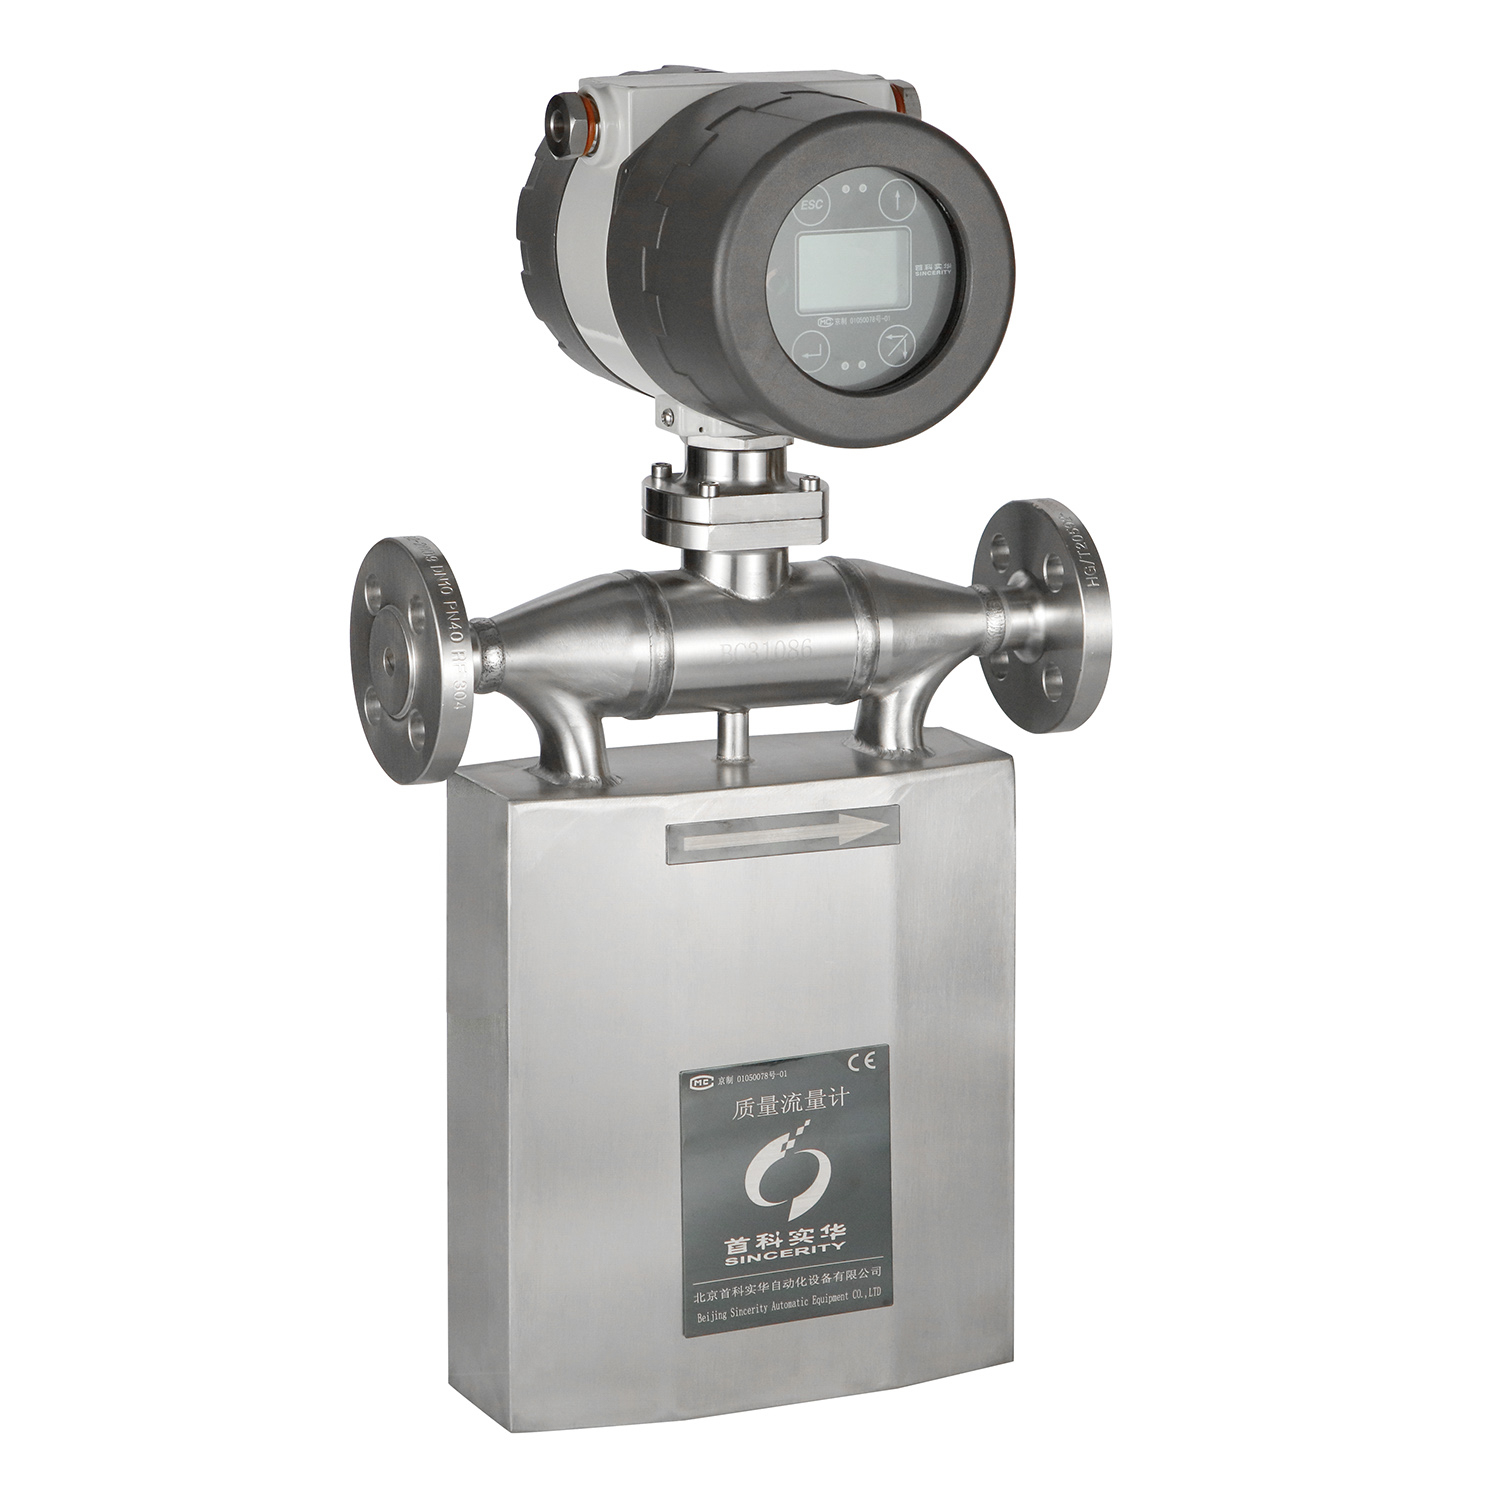 Sincerity latest micro motion coriolis flow meters company for oil and gas-1